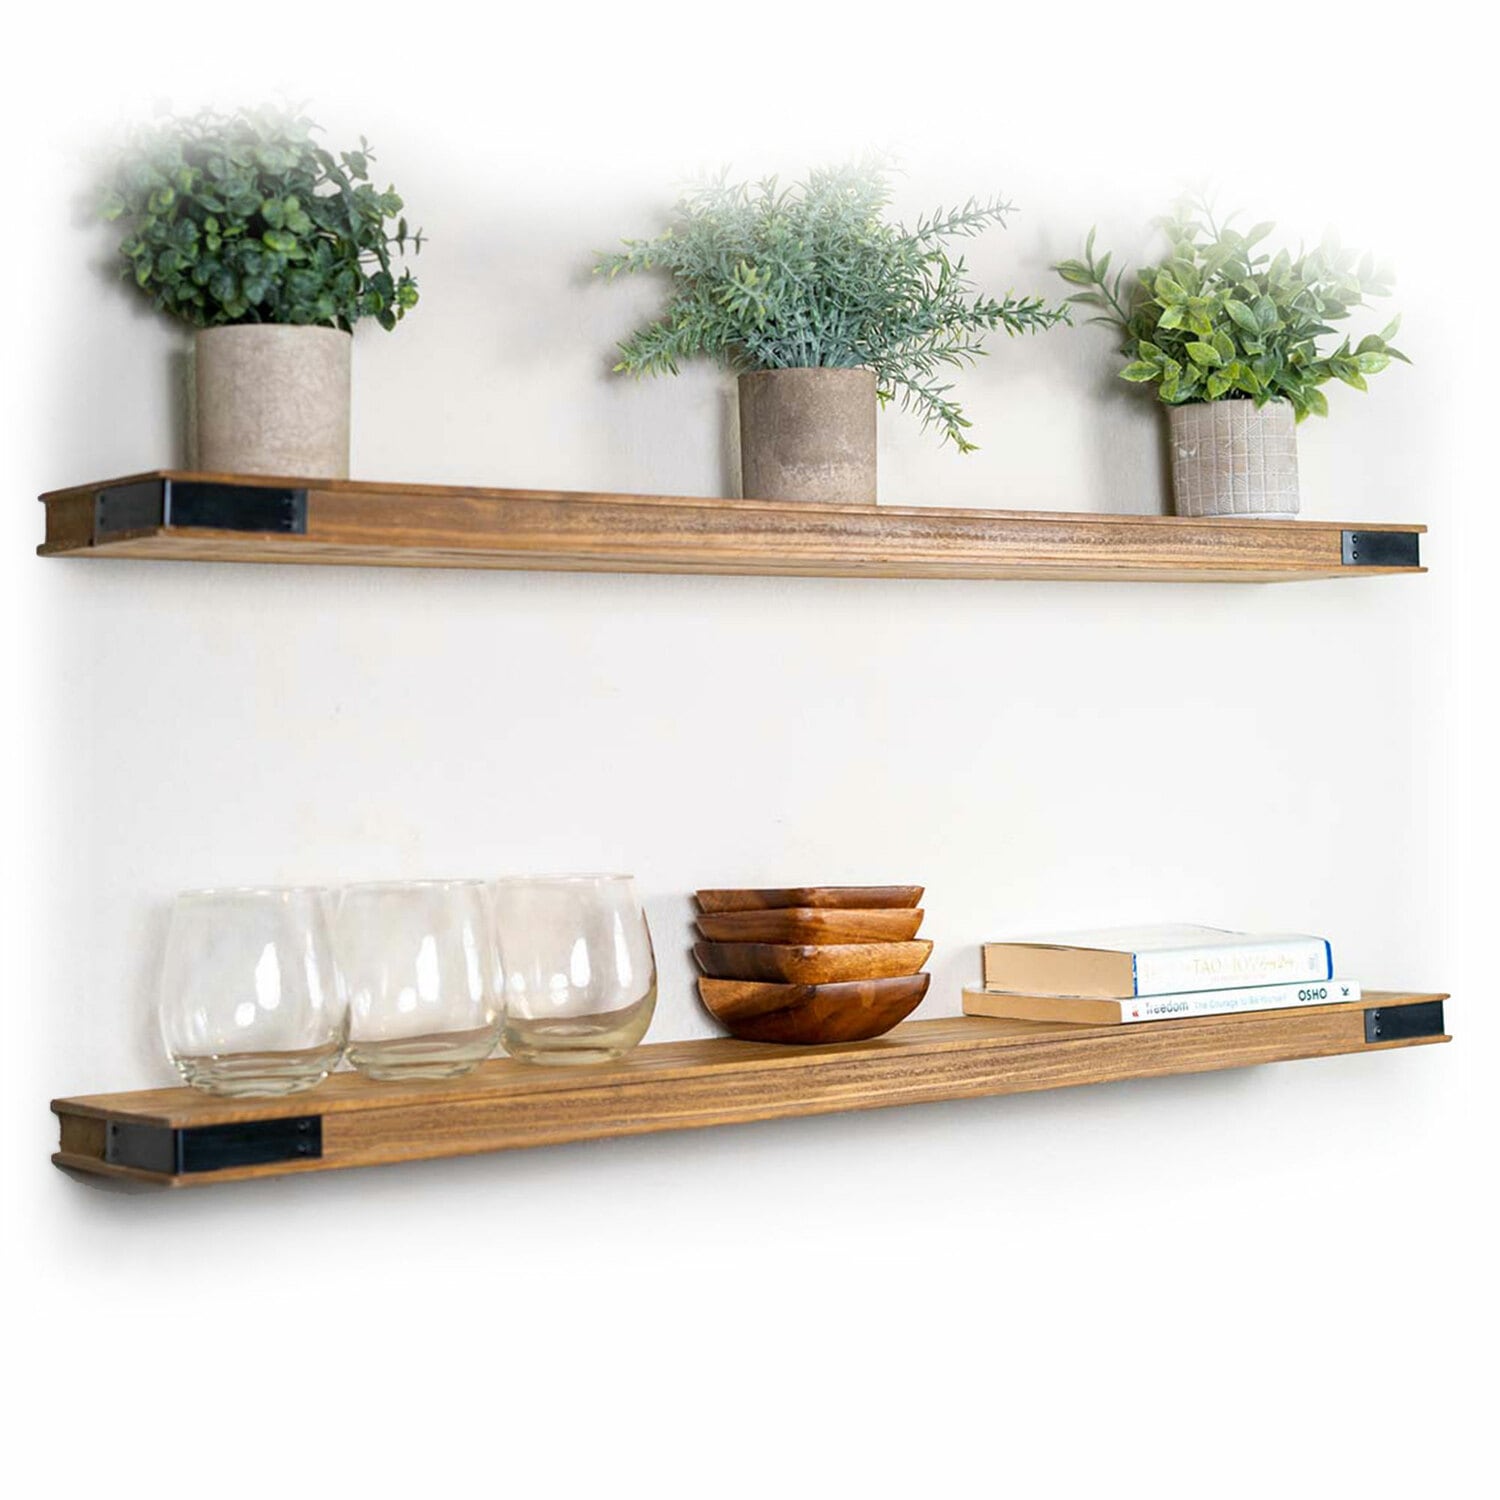 How to Make DIY Floating Kitchen Shelves - Grace In My Space